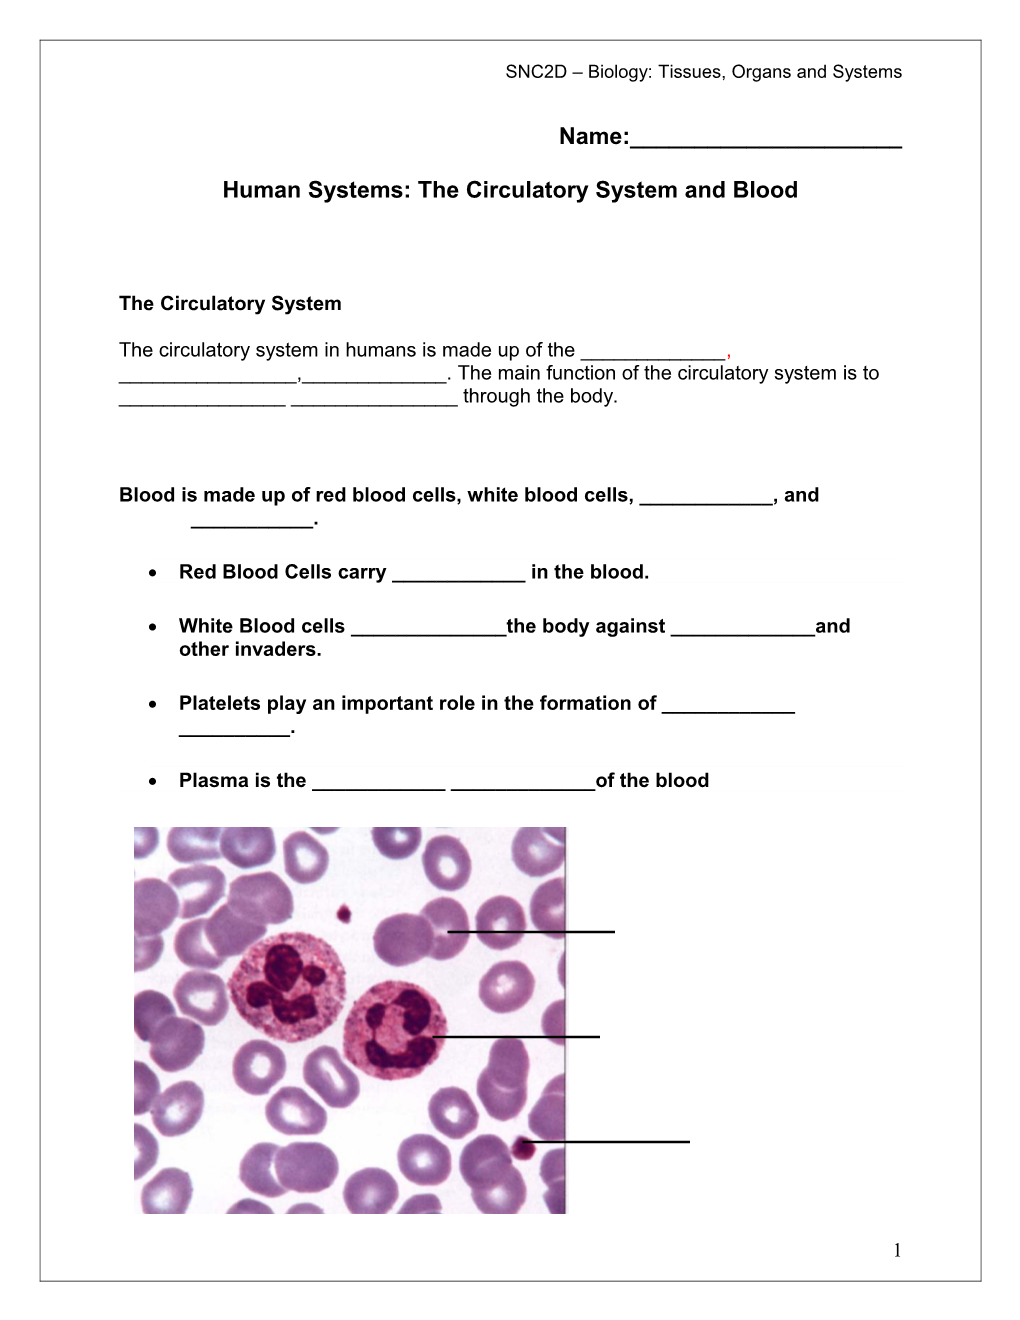 Human Systems: the Circulatory System and Blood